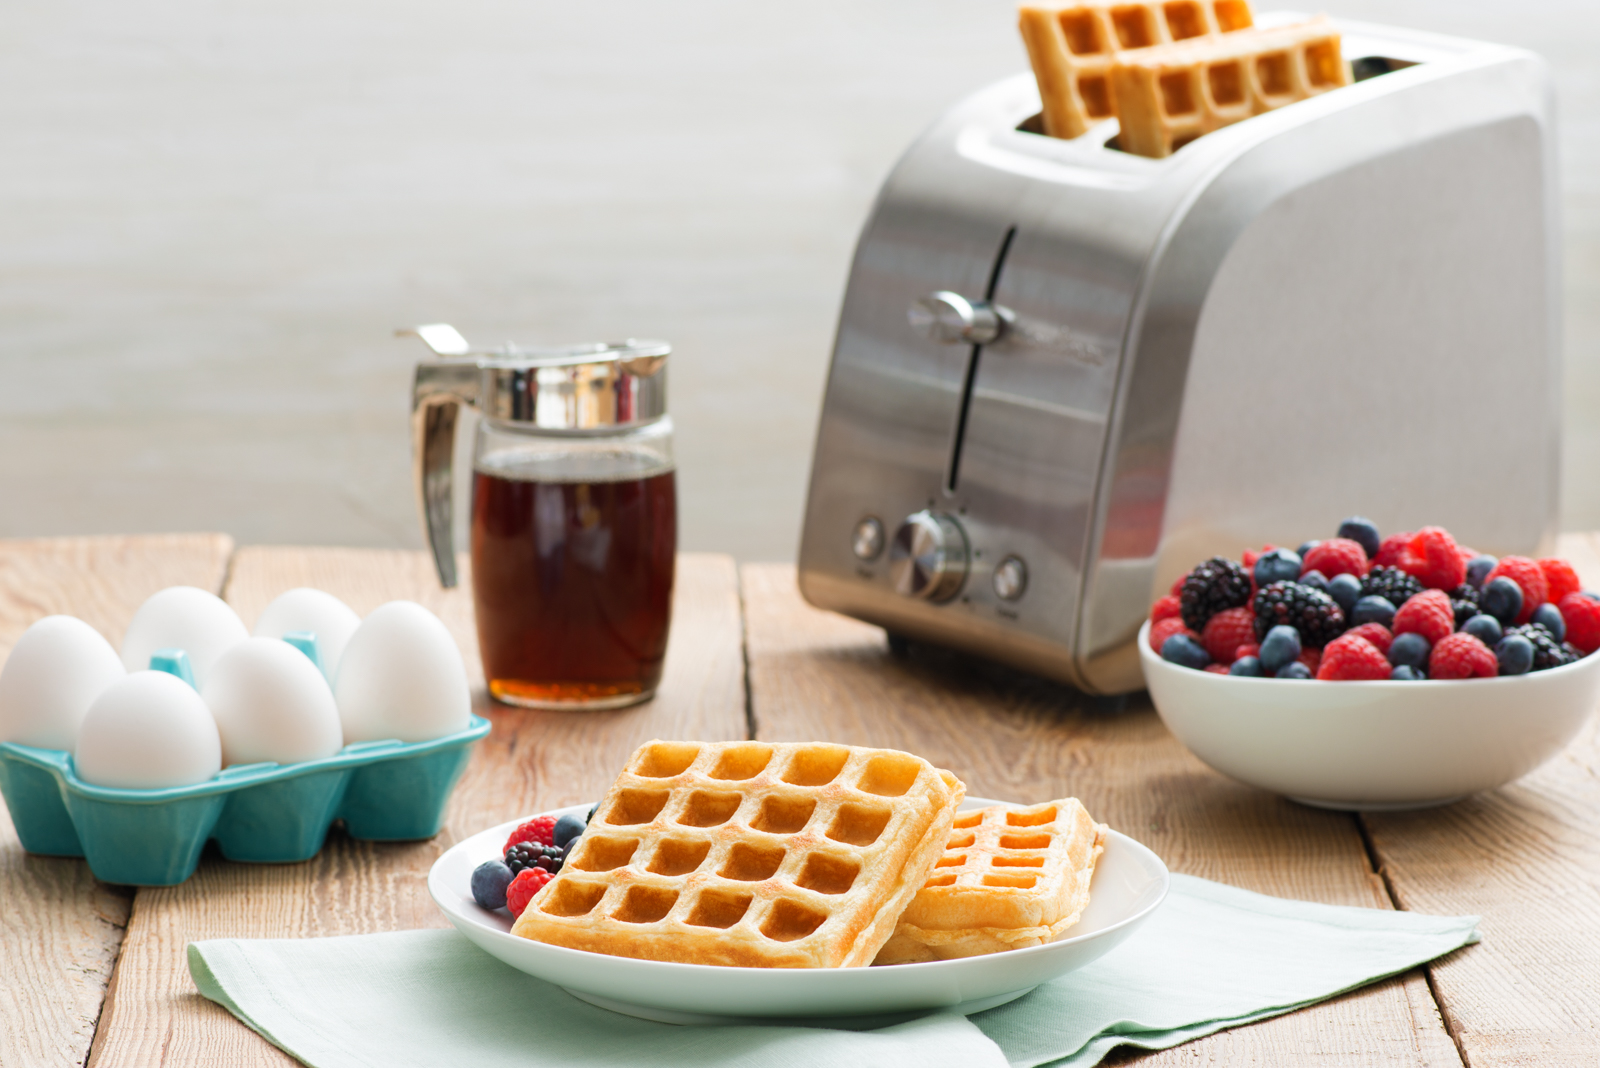 How Long To Cook Waffles In Toaster